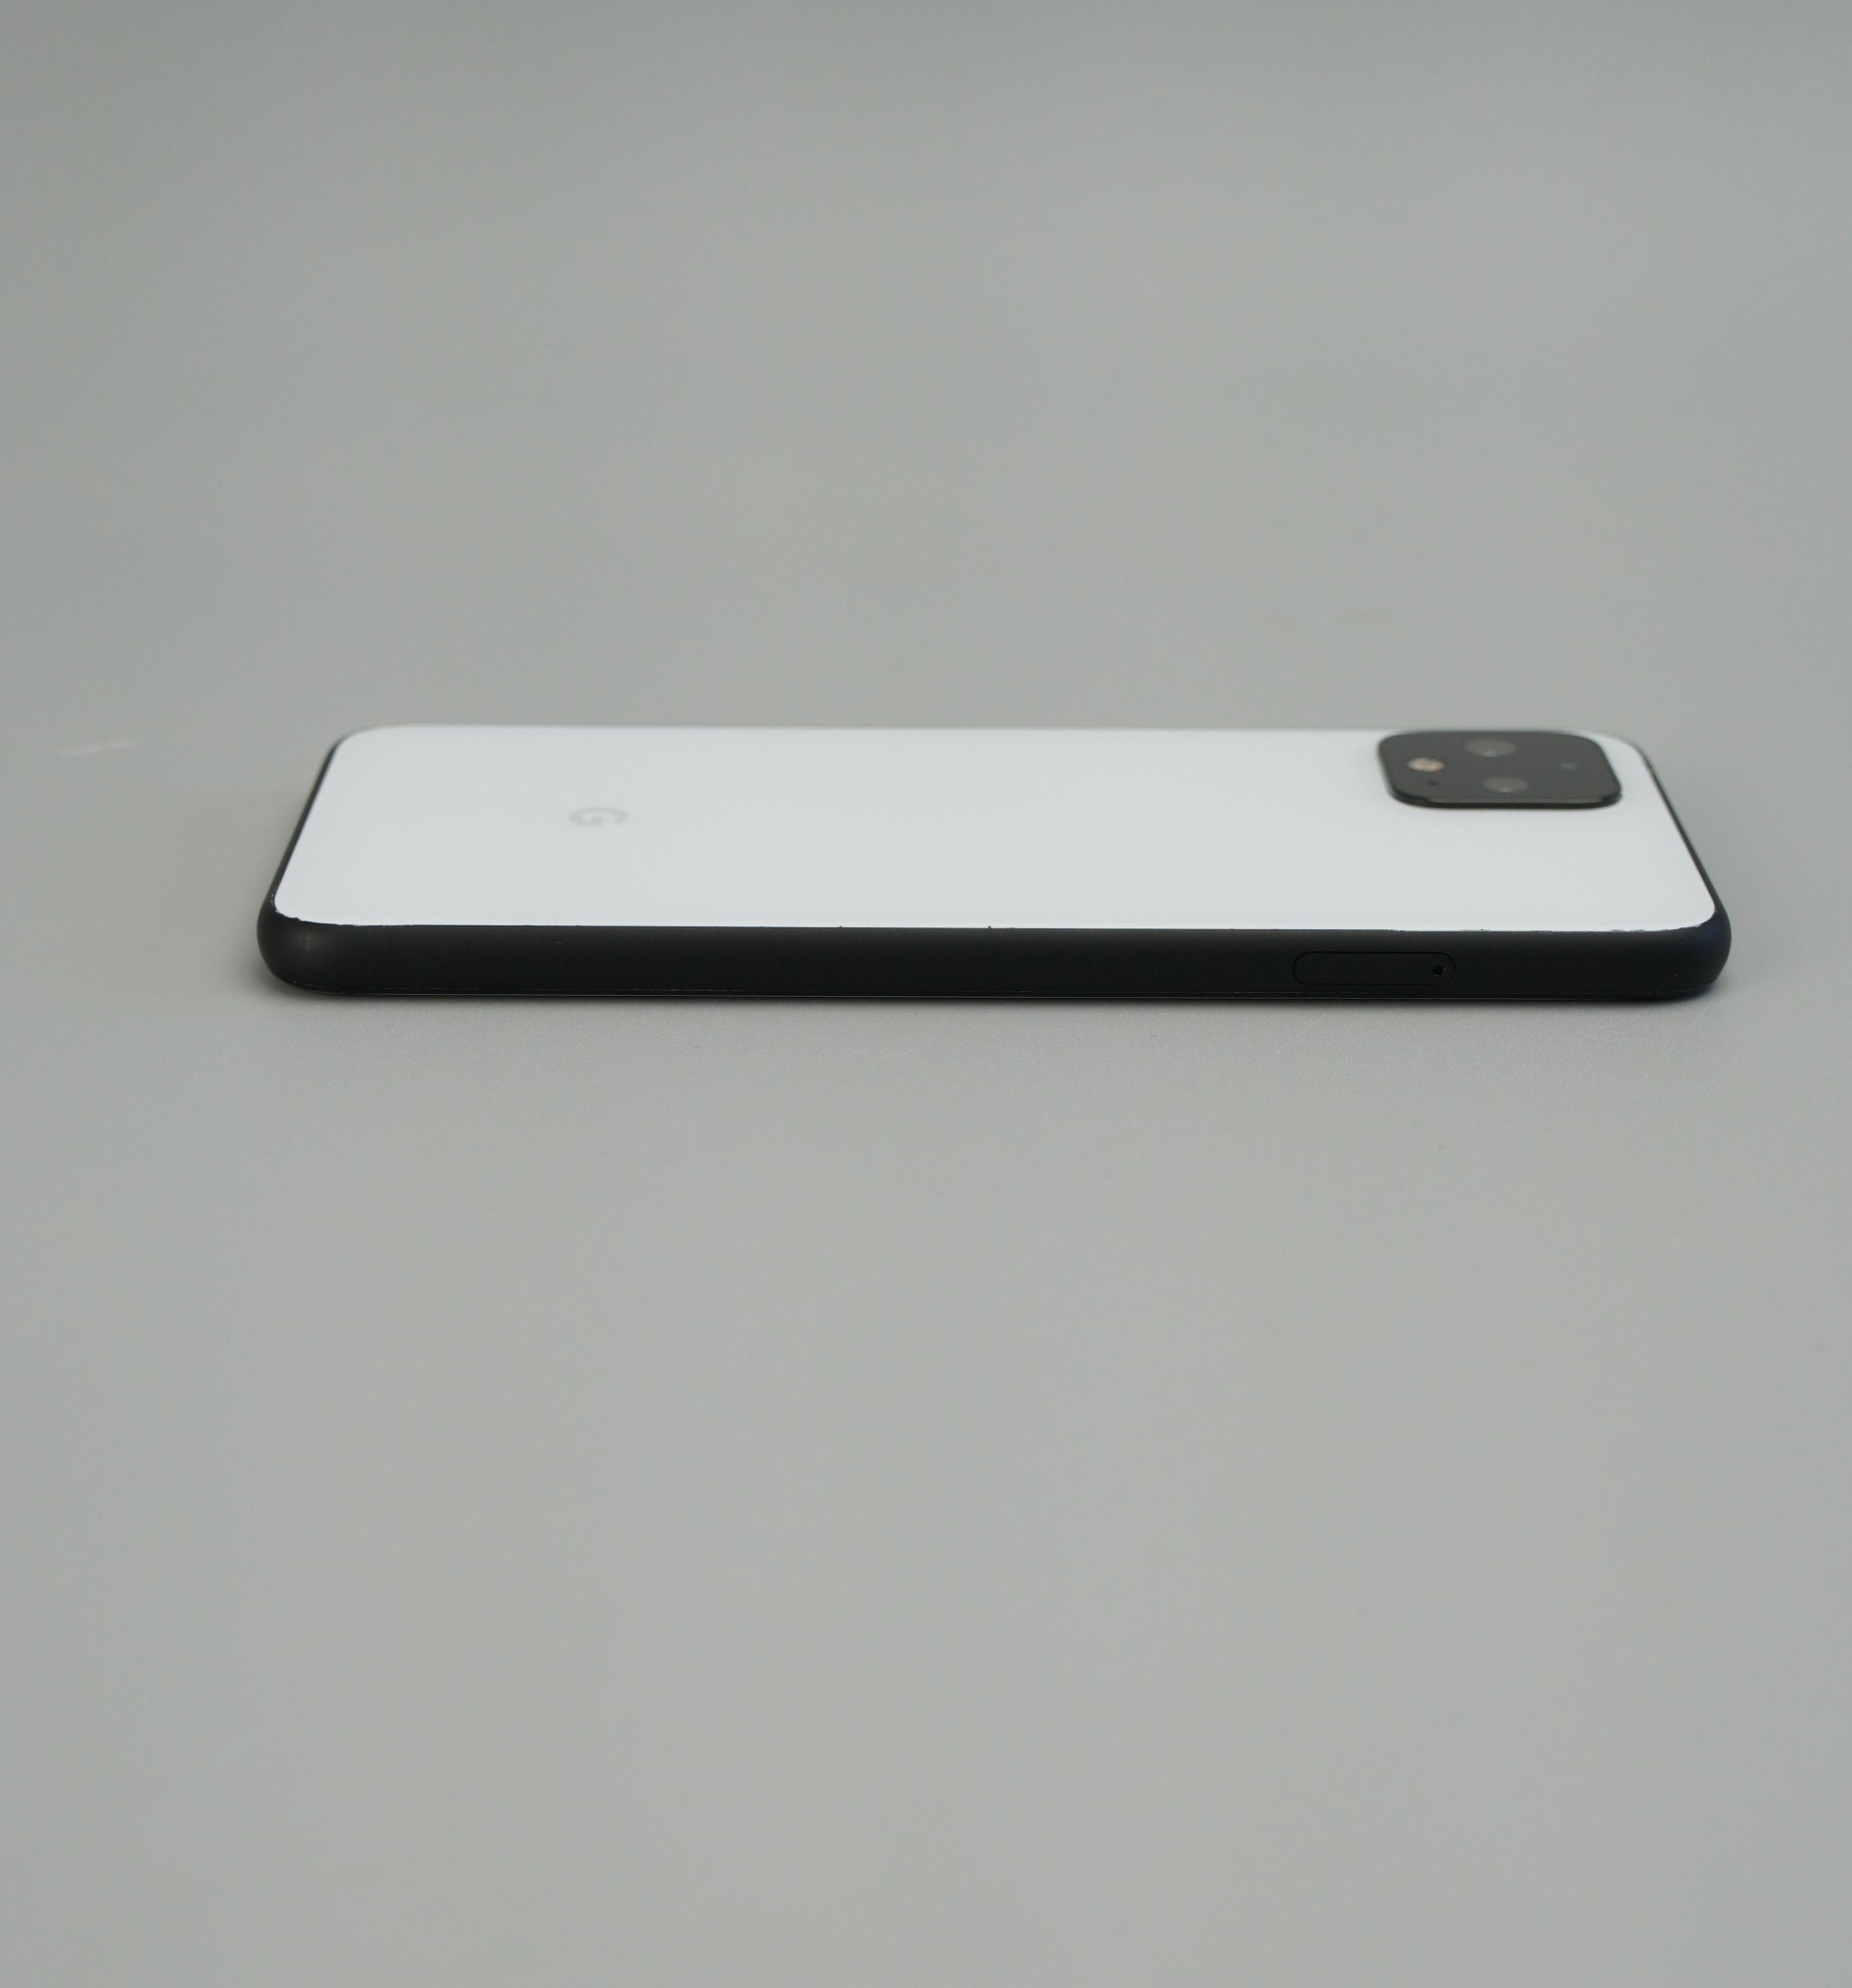 Google Pixel 4 6/64GB Clearly White  17